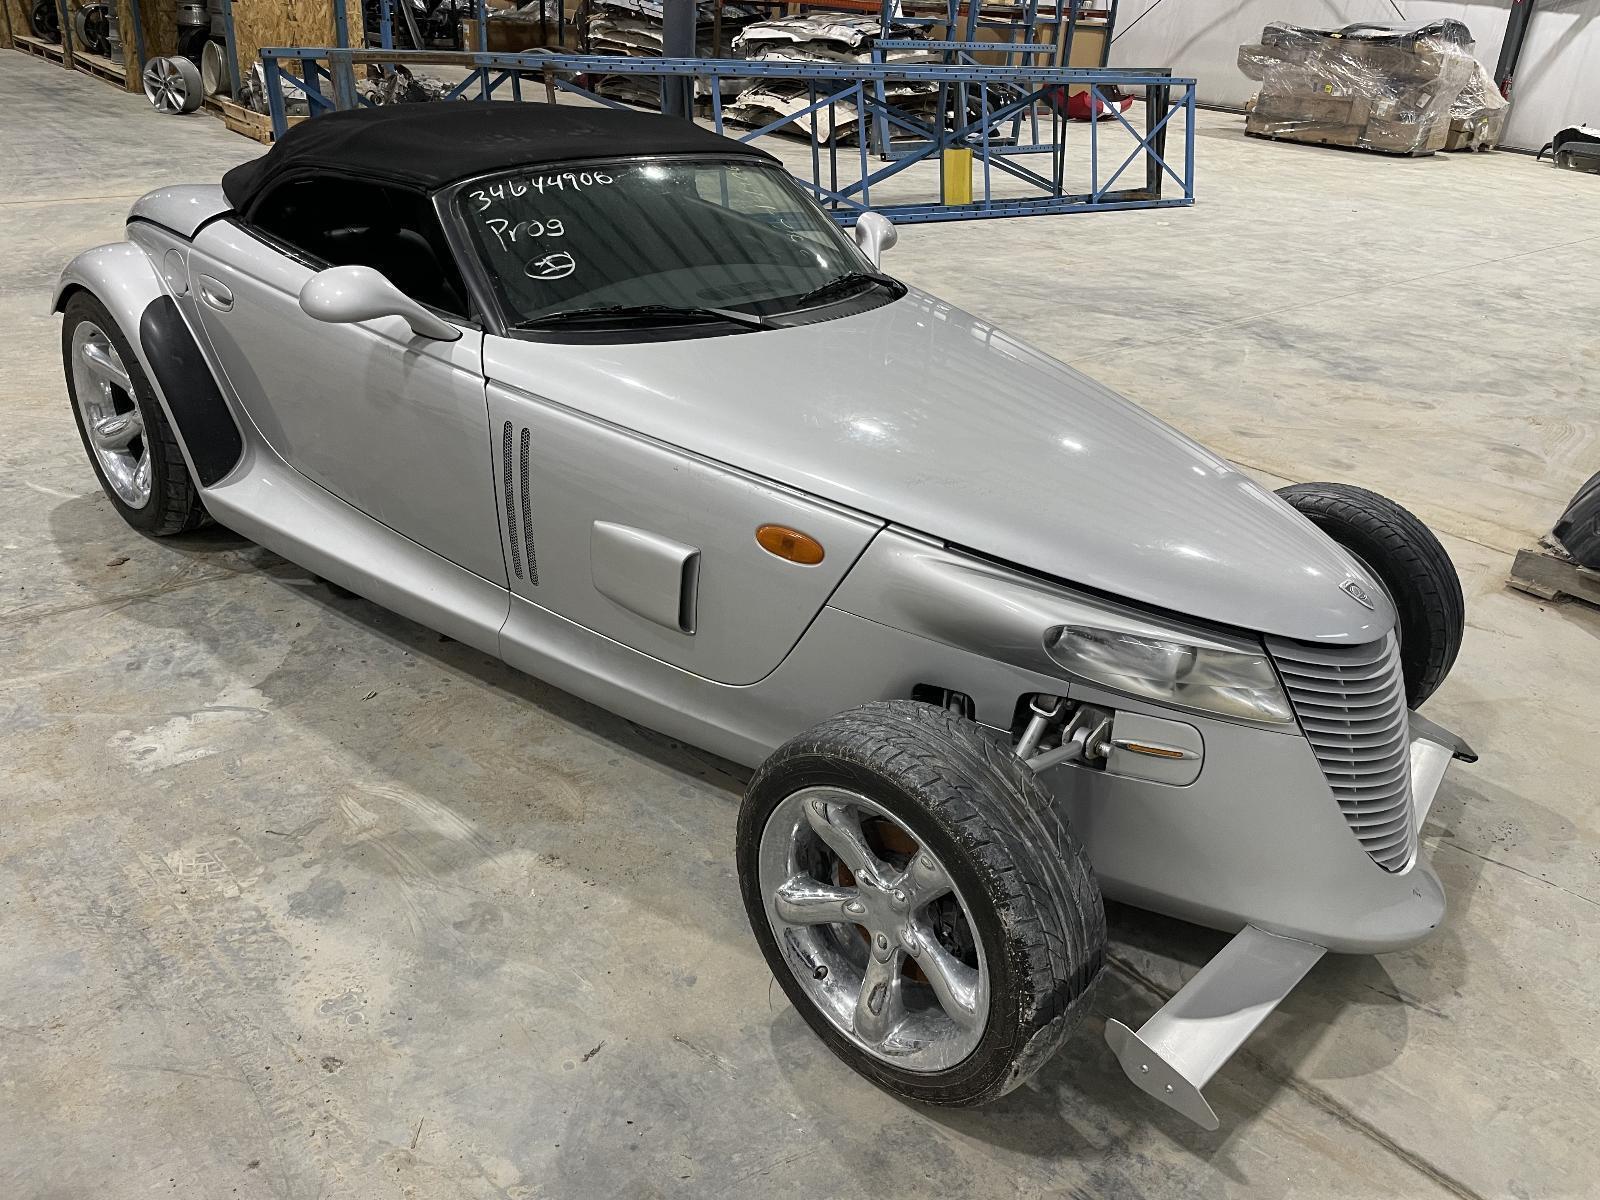 2001 PLYMOUTH PROWLER AUTOMATIC TRANSMISSION AT 99 00 01 02 NOT COMPLETE VEHICLE